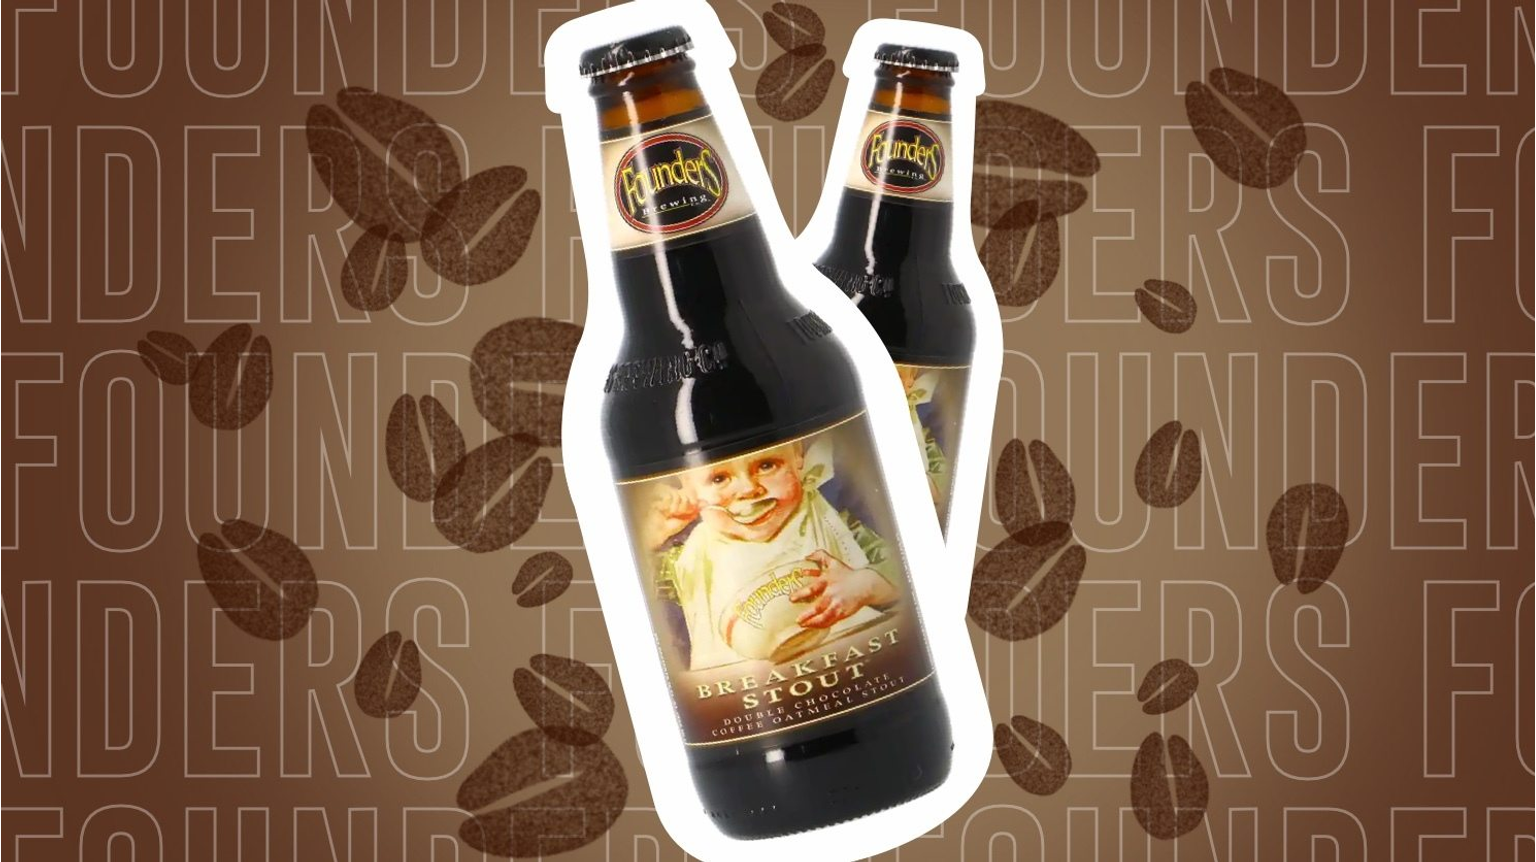 thumbnail for blog article named: Beery Christmas Giorno 8: Founders Breakfast Stout